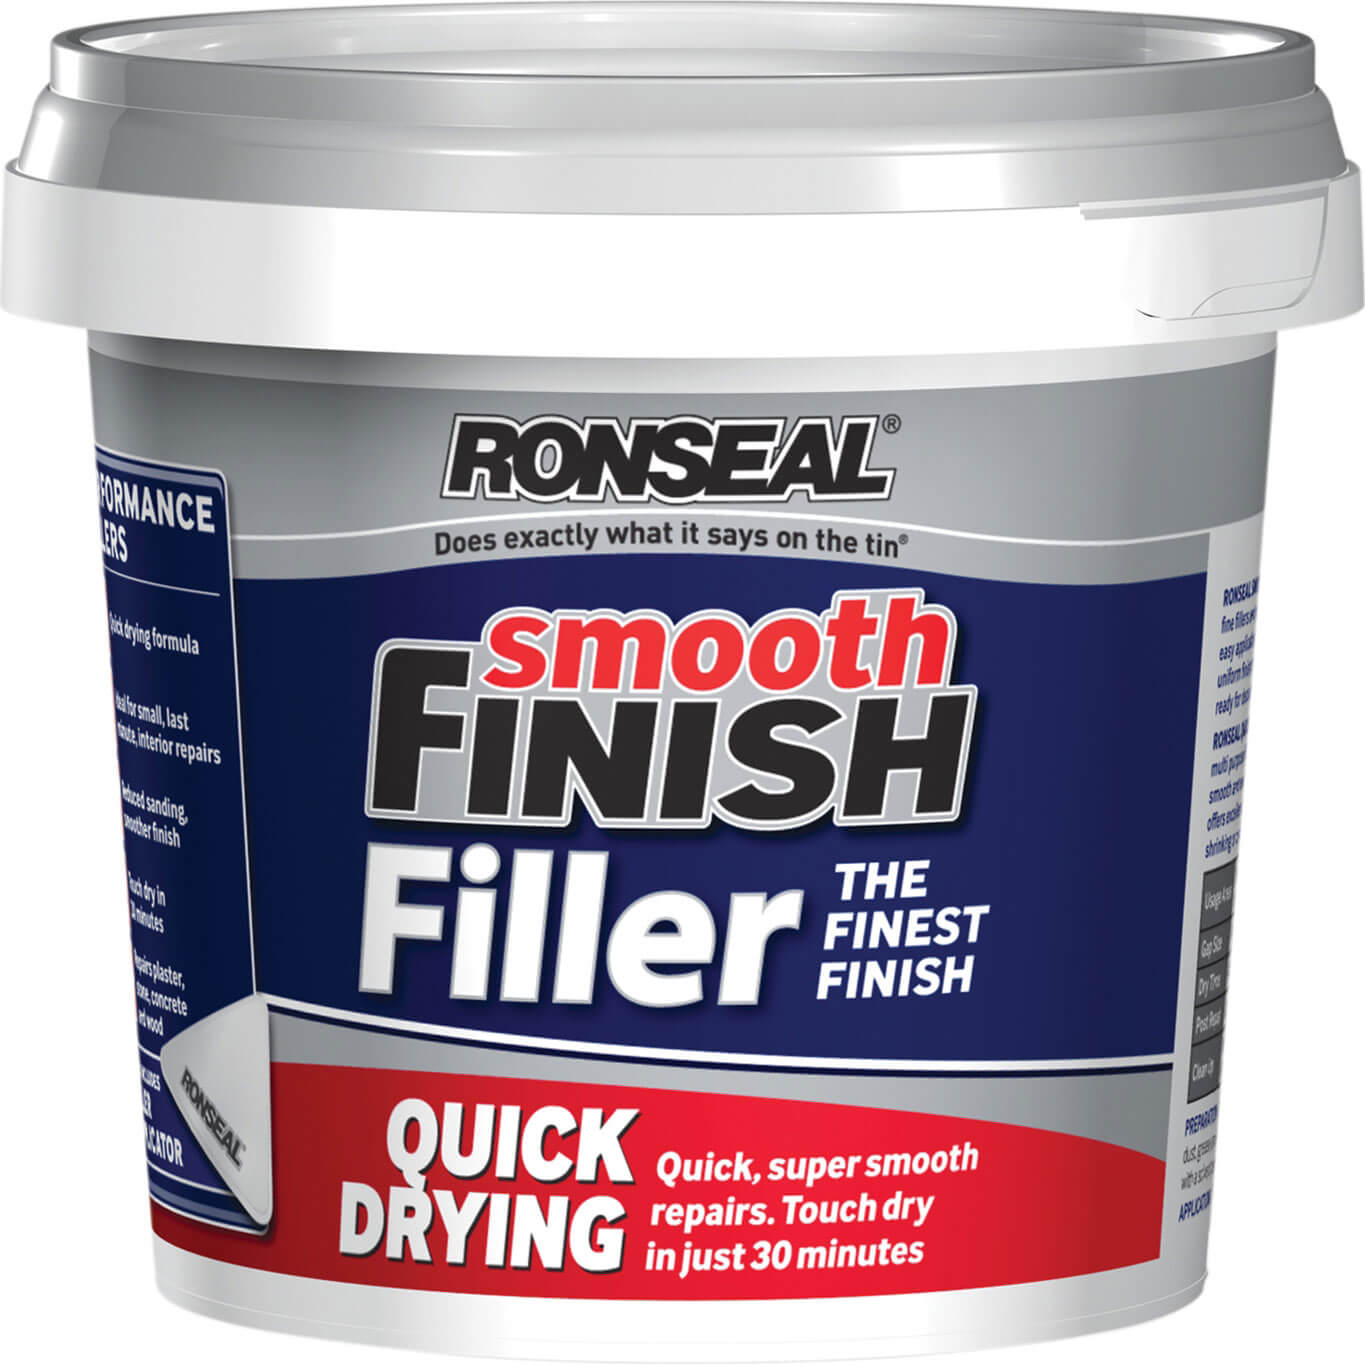 Image of Ronseal Smooth Finish Quick Drying Multi Purpose Filler 600g